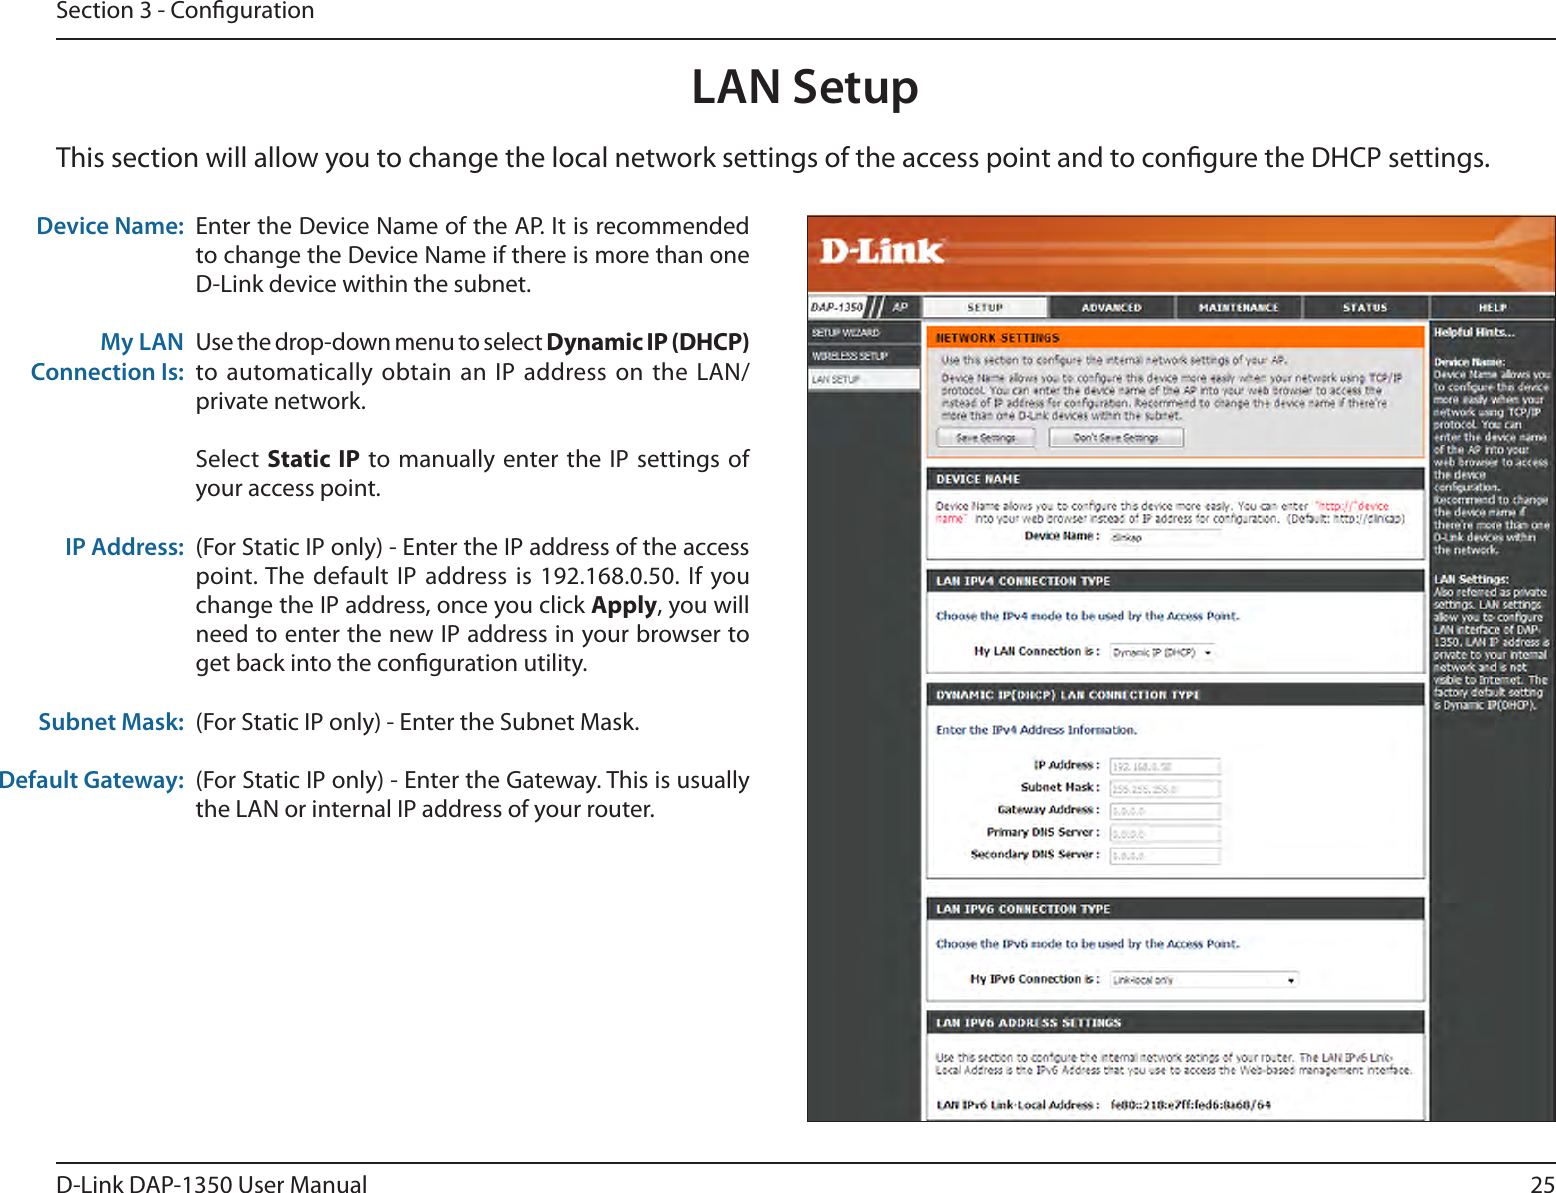 25D-Link DAP-1350 User ManualSection 3 - CongurationLAN SetupThis section will allow you to change the local network settings of the access point and to congure the DHCP settings.Device Name: My LAN Connection Is:IP Address:Subnet Mask:Default Gateway:Enter the Device Name of the AP. It is recommended to change the Device Name if there is more than one D-Link device within the subnet.Use the drop-down menu to select Dynamic IP (DHCP) to automatically obtain an  IP address on the  LAN/private network. Select  Static IP to manually enter the  IP settings of your access point.(For Static IP only) - Enter the IP address of the access point. The default IP address is  192.168.0.50. If you change the IP address, once you click Apply, you will need to enter the new IP address in your browser to get back into the conguration utility.(For Static IP only) - Enter the Subnet Mask.(For Static IP only) - Enter the Gateway. This is usually the LAN or internal IP address of your router.